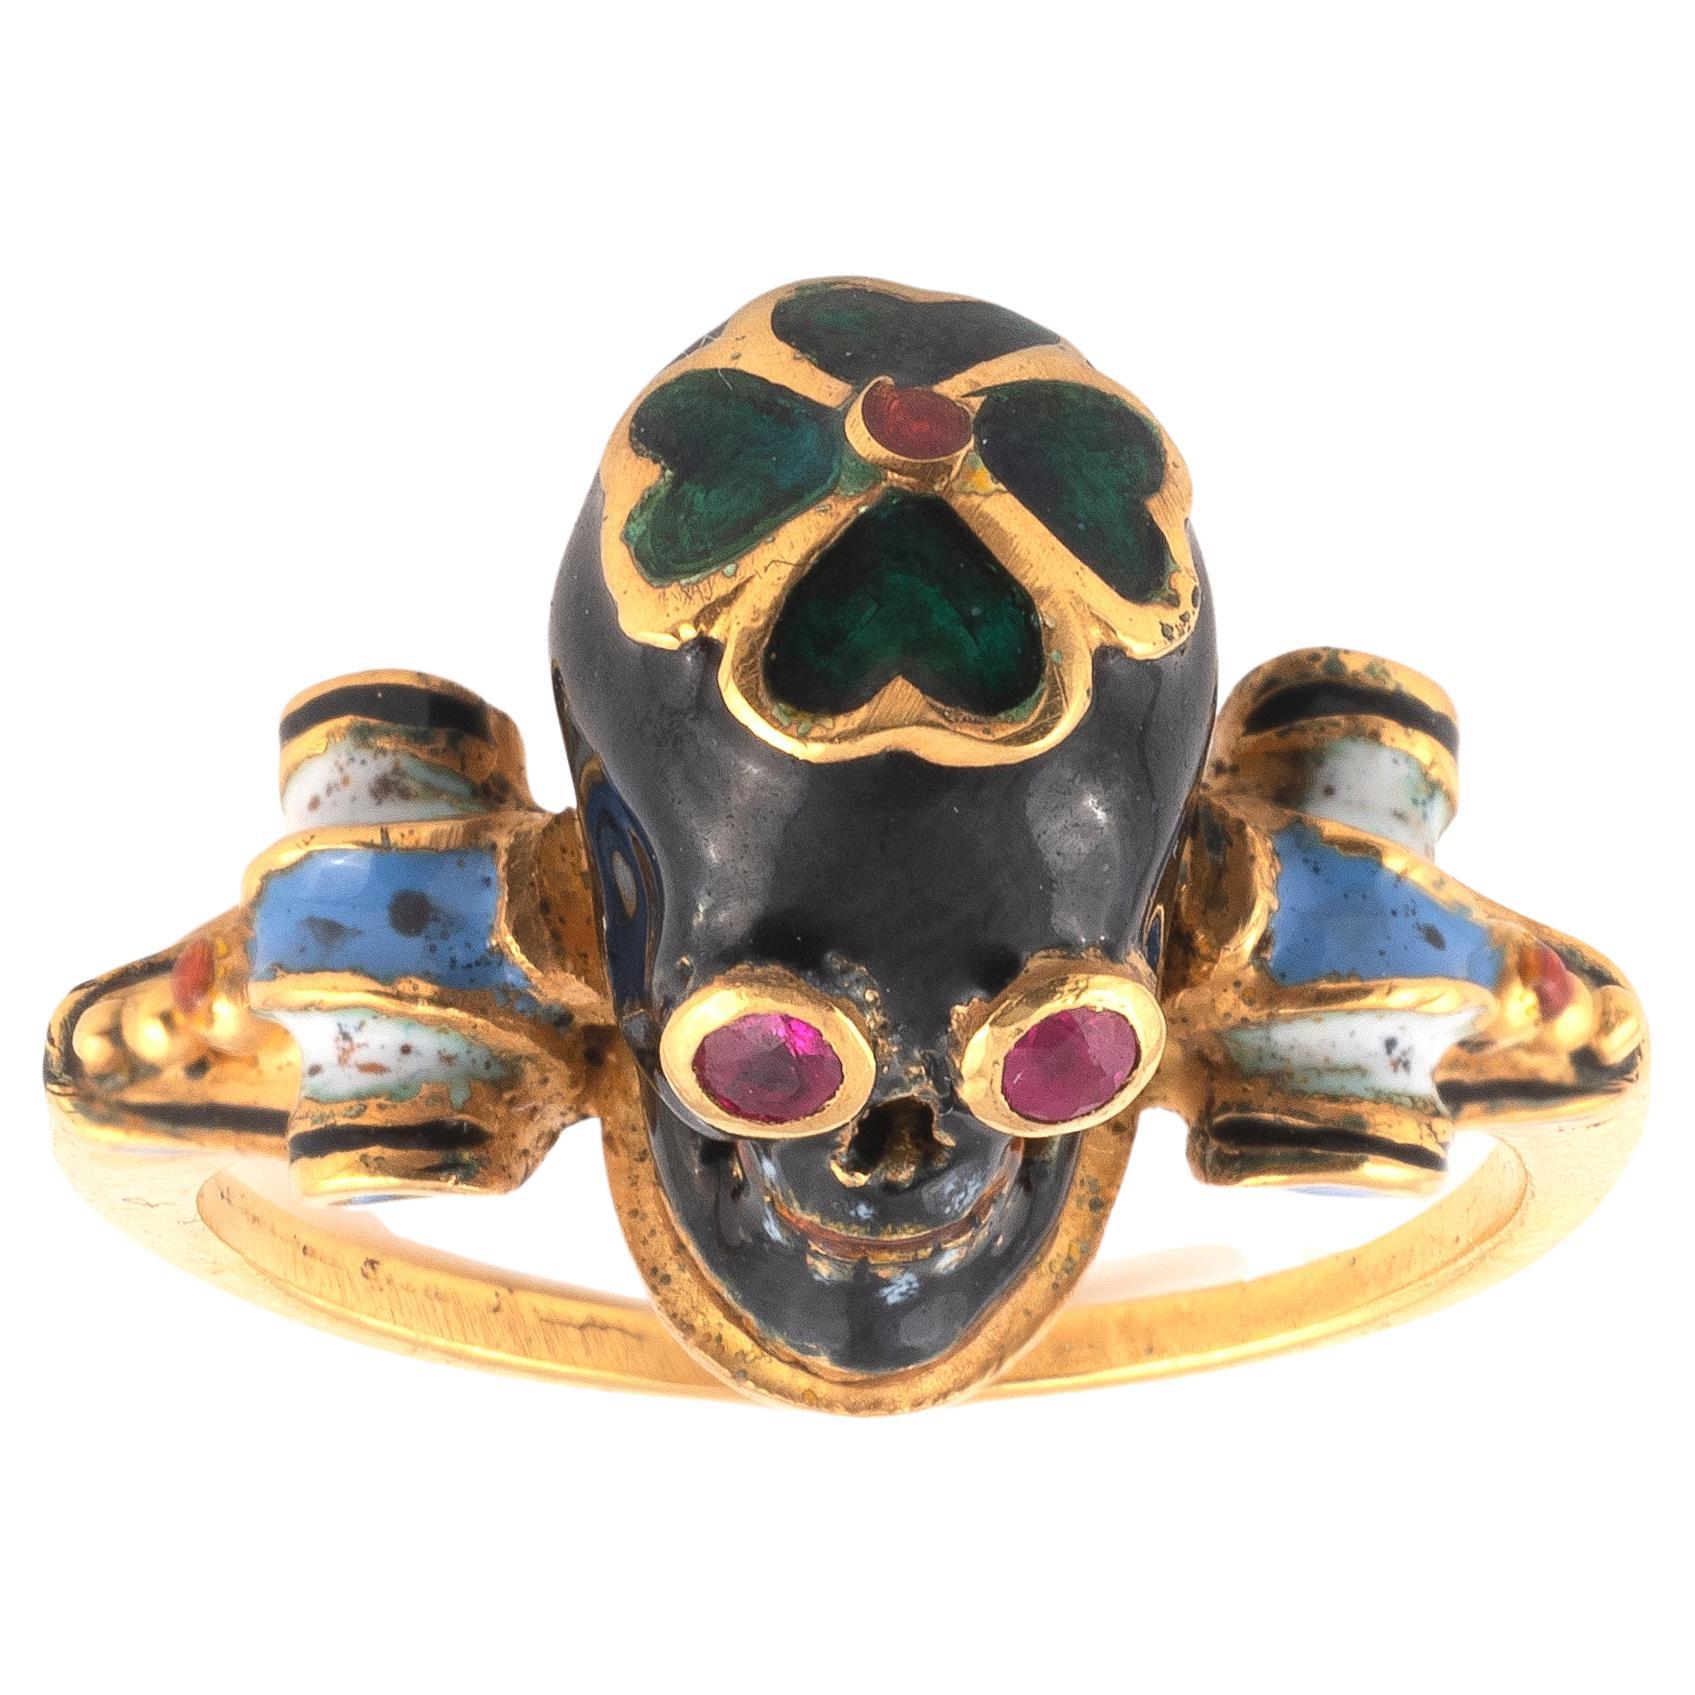 The ruby eye black enamel Memento Mori skull surmounted by a dark green enamel quatrefoil, the shoulders decorated with multi colored enamel scrolls. Mounted in 18Kt yellow gold Signed A. Codognato Venezia

Finger size: 7
Weight: 7,59gr